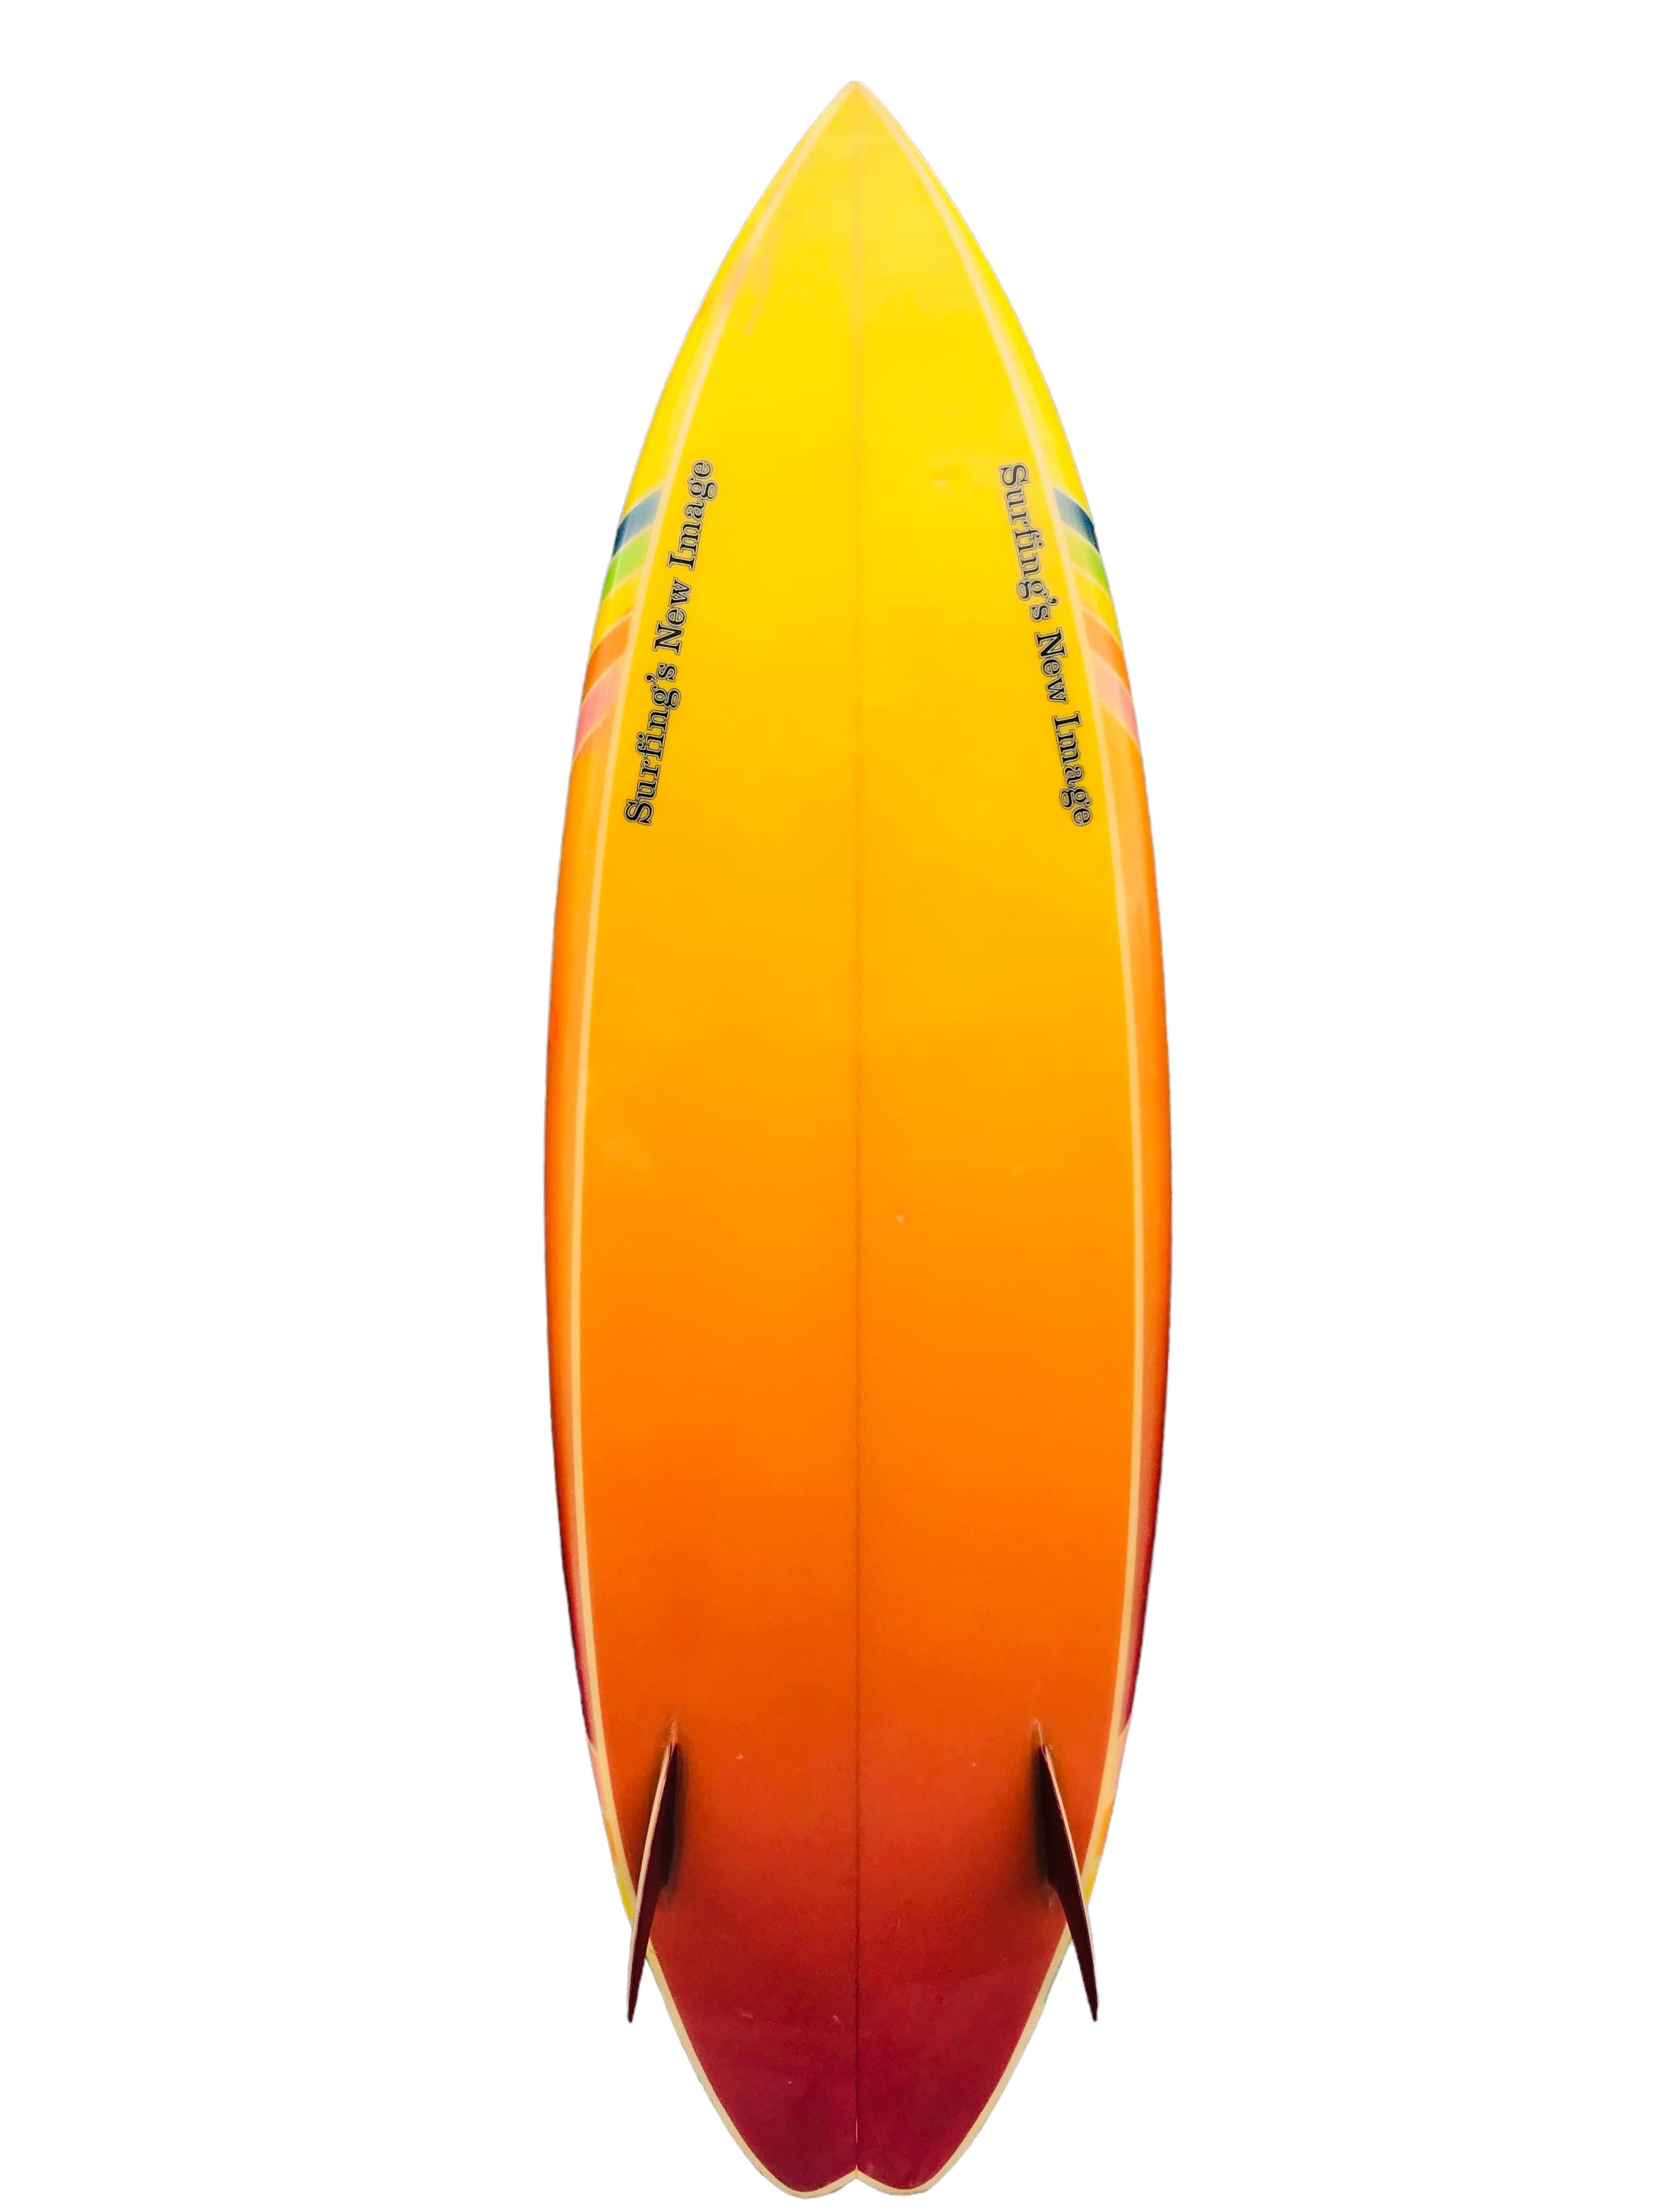 Early-1980s Surfings New Image twin fin surfboard made by Rick Hamon. Features a remarkable rainbow airbrushed work of art including glitter embellished fiberglass. Swallow tail with multi colored fixed twin-fin setup. A magnificent example of a